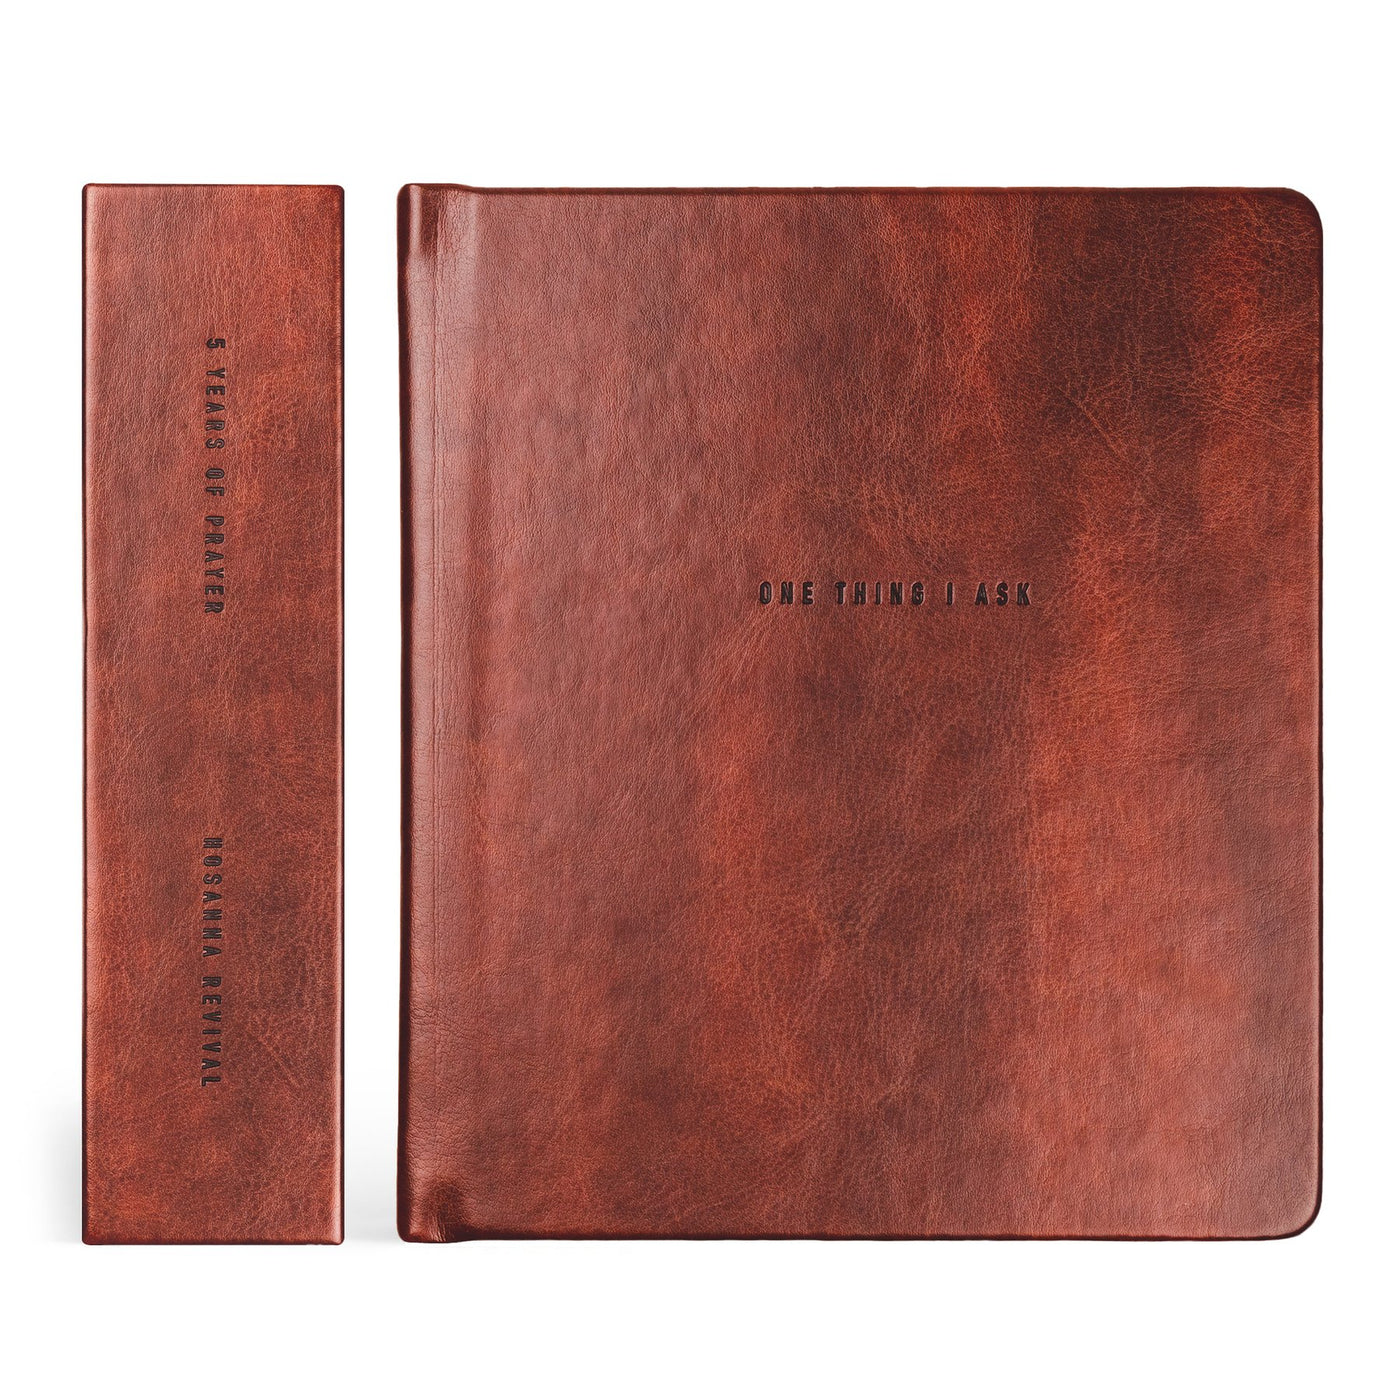 Hosanna Revival Five Year Prayer Journal - One Thing I Ask - Stockholm Theme Cover and Spine